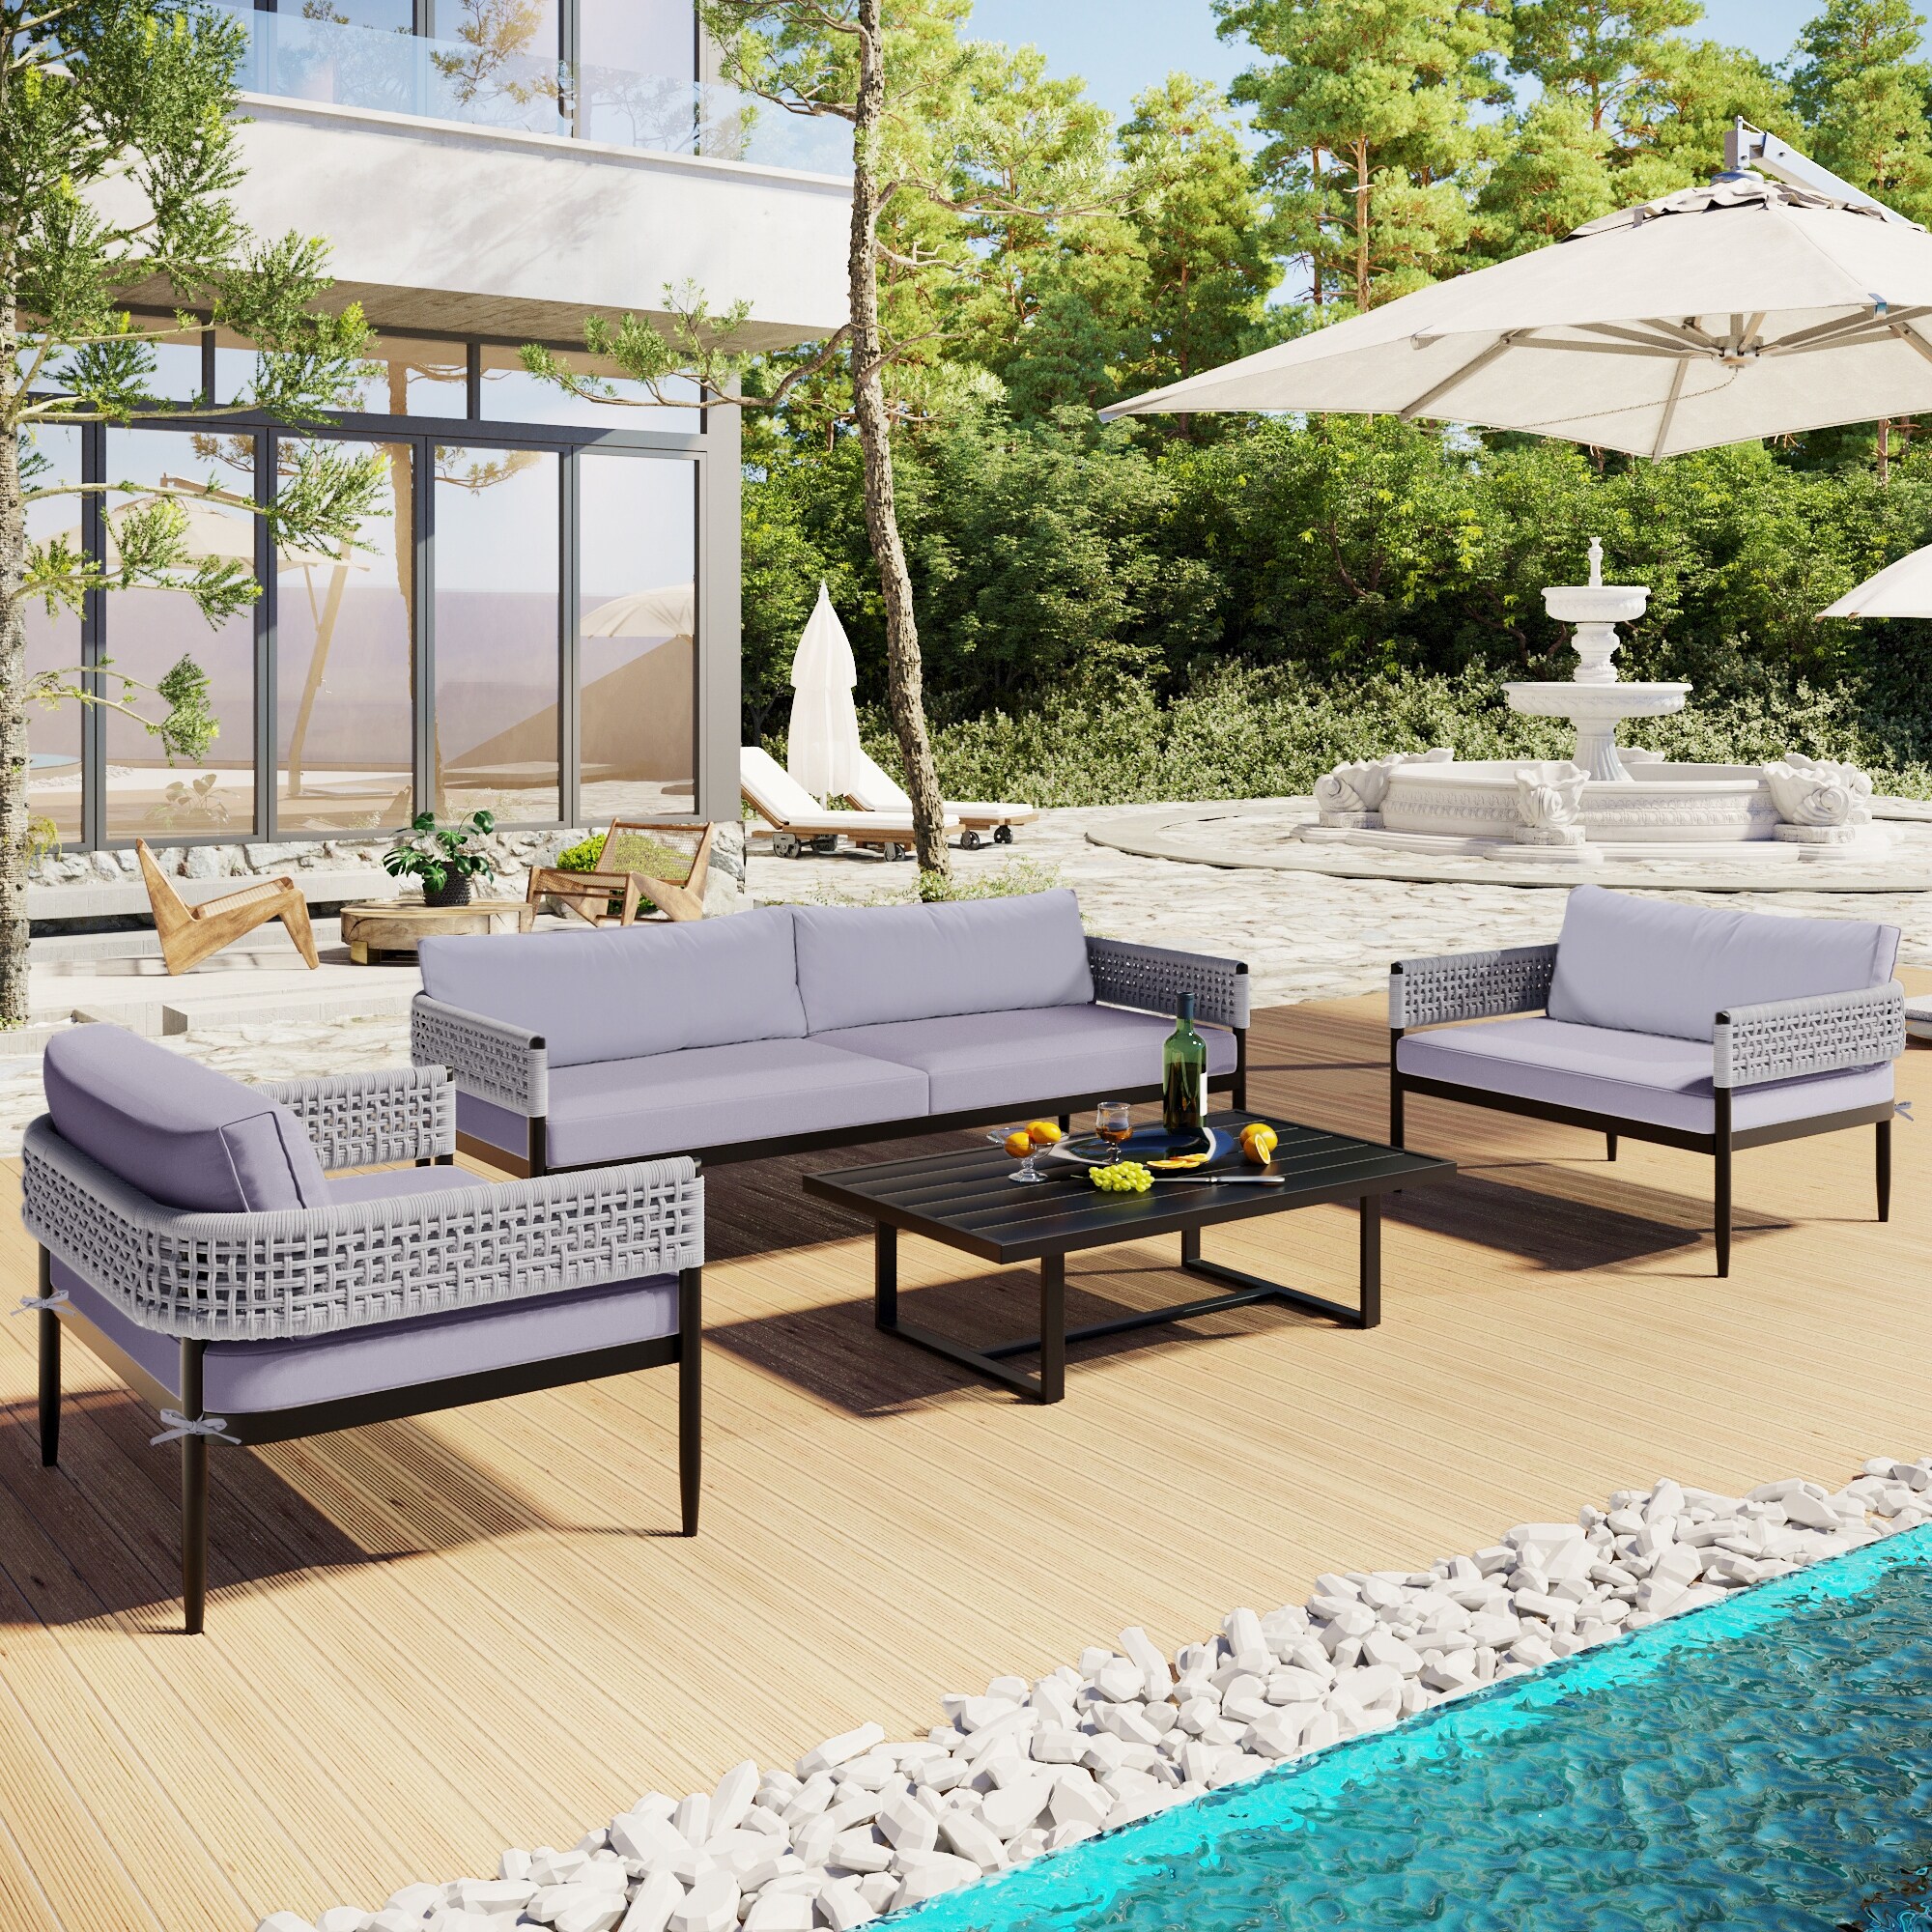 Outdoor Furniture Set  Includes 1 Love Sofa  2 Single Sofas  And 1 Coffee Table  Uv-proof  Waterproof  And Rust-proof